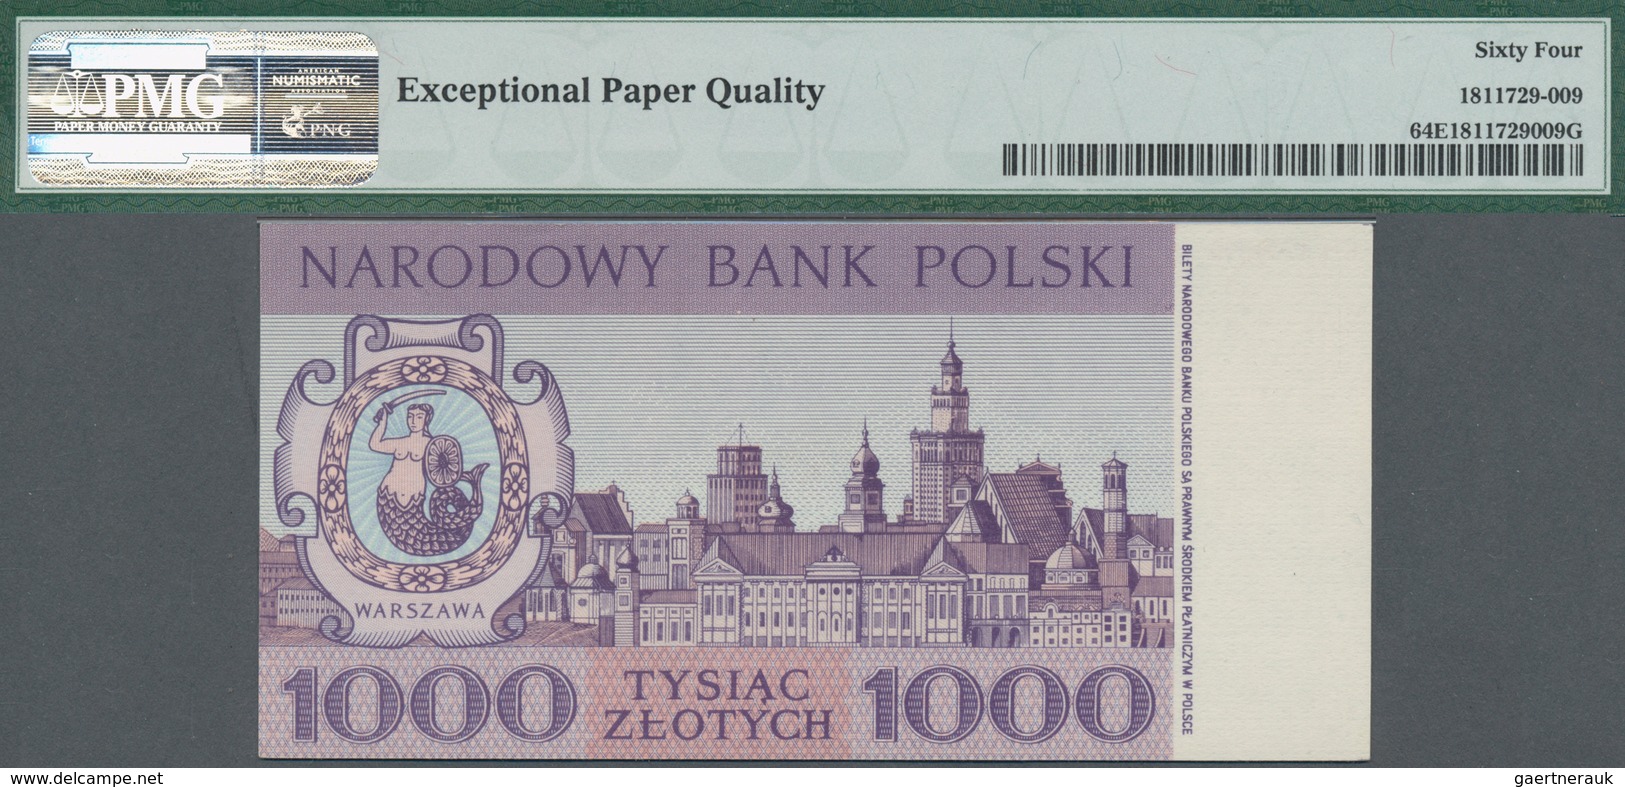 Poland / Polen: Unissued Banknote essay 20 Zlotych 1965, P.NL, in perfect UNC condition, offset prin